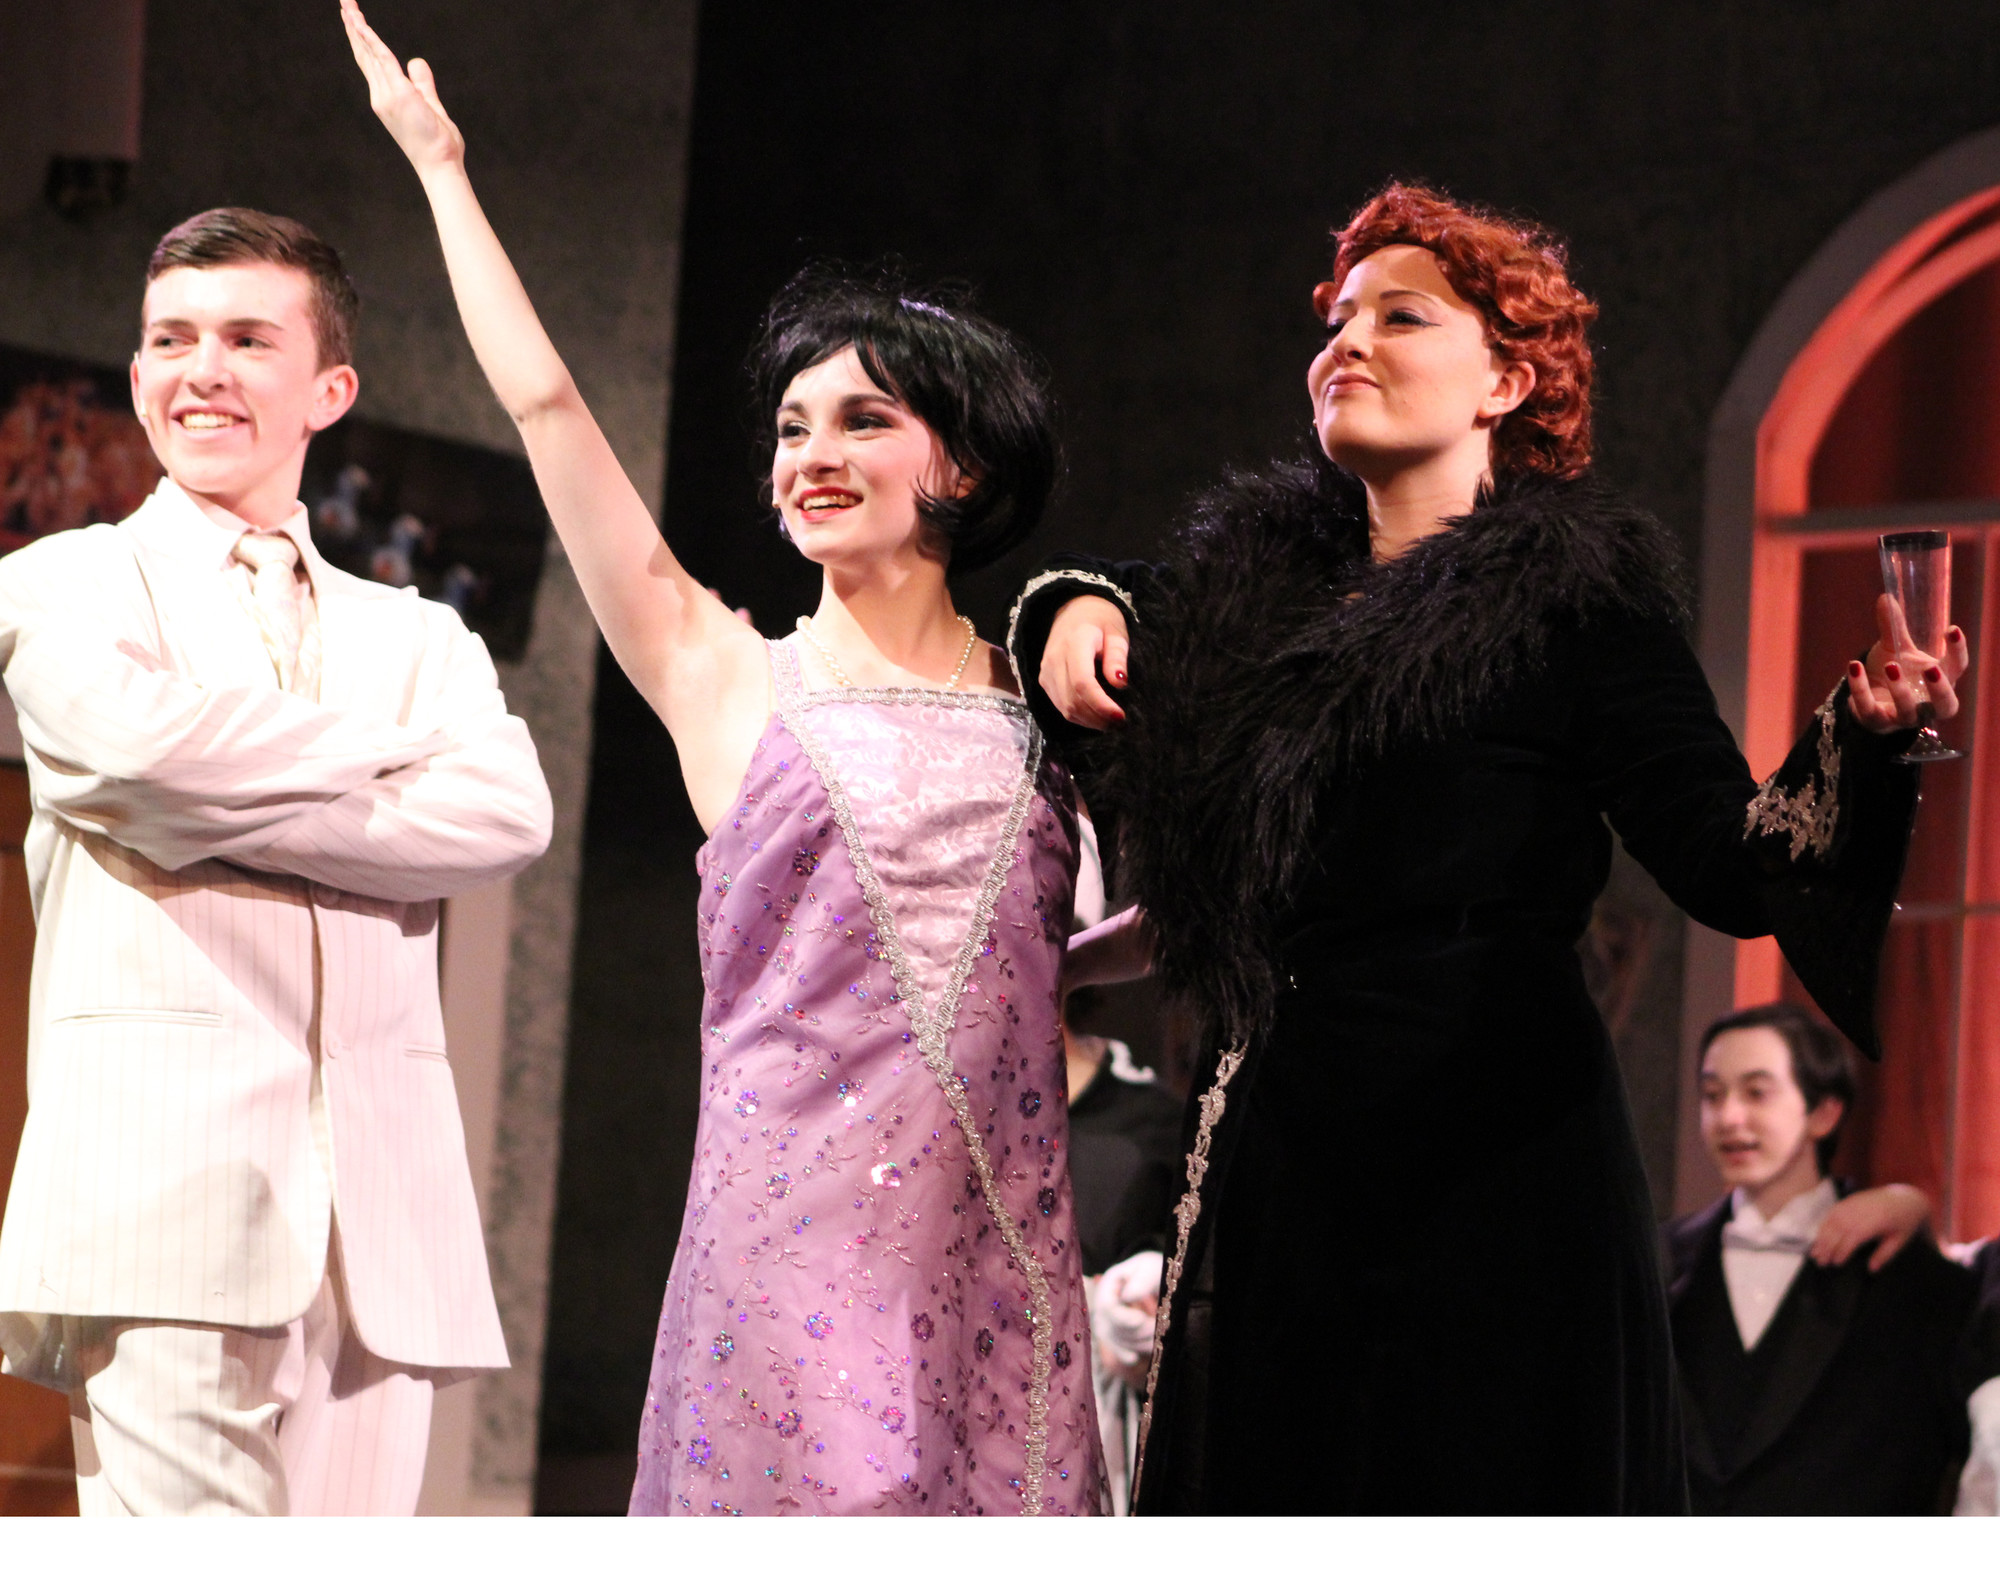 Jonathan DeTullio as Robert Martin, left, Olivia Dowden as Janet Van De Graaff and Courtney Krupa as the titular Drowsy Chaperone lit up the stage.